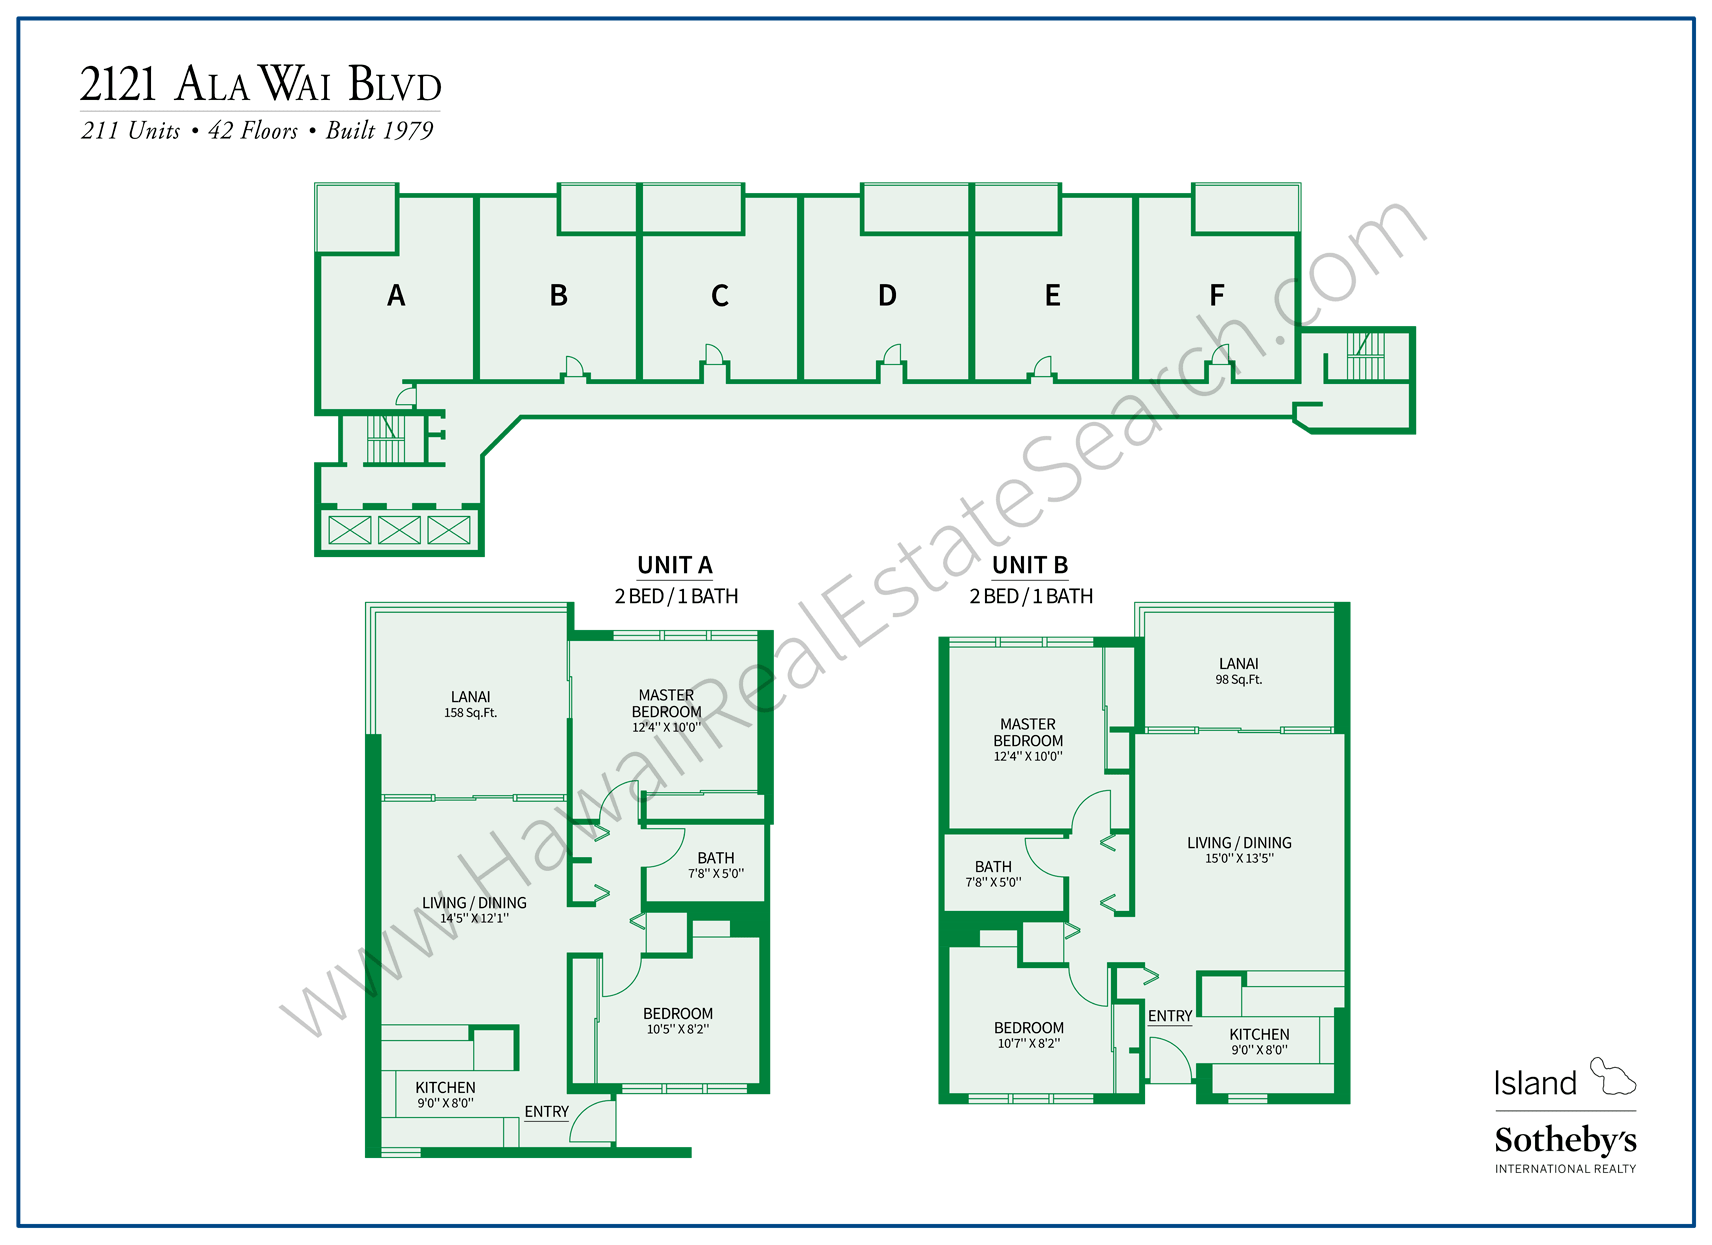 2121 Ala Wai Blvd Property Map and Floor Plans